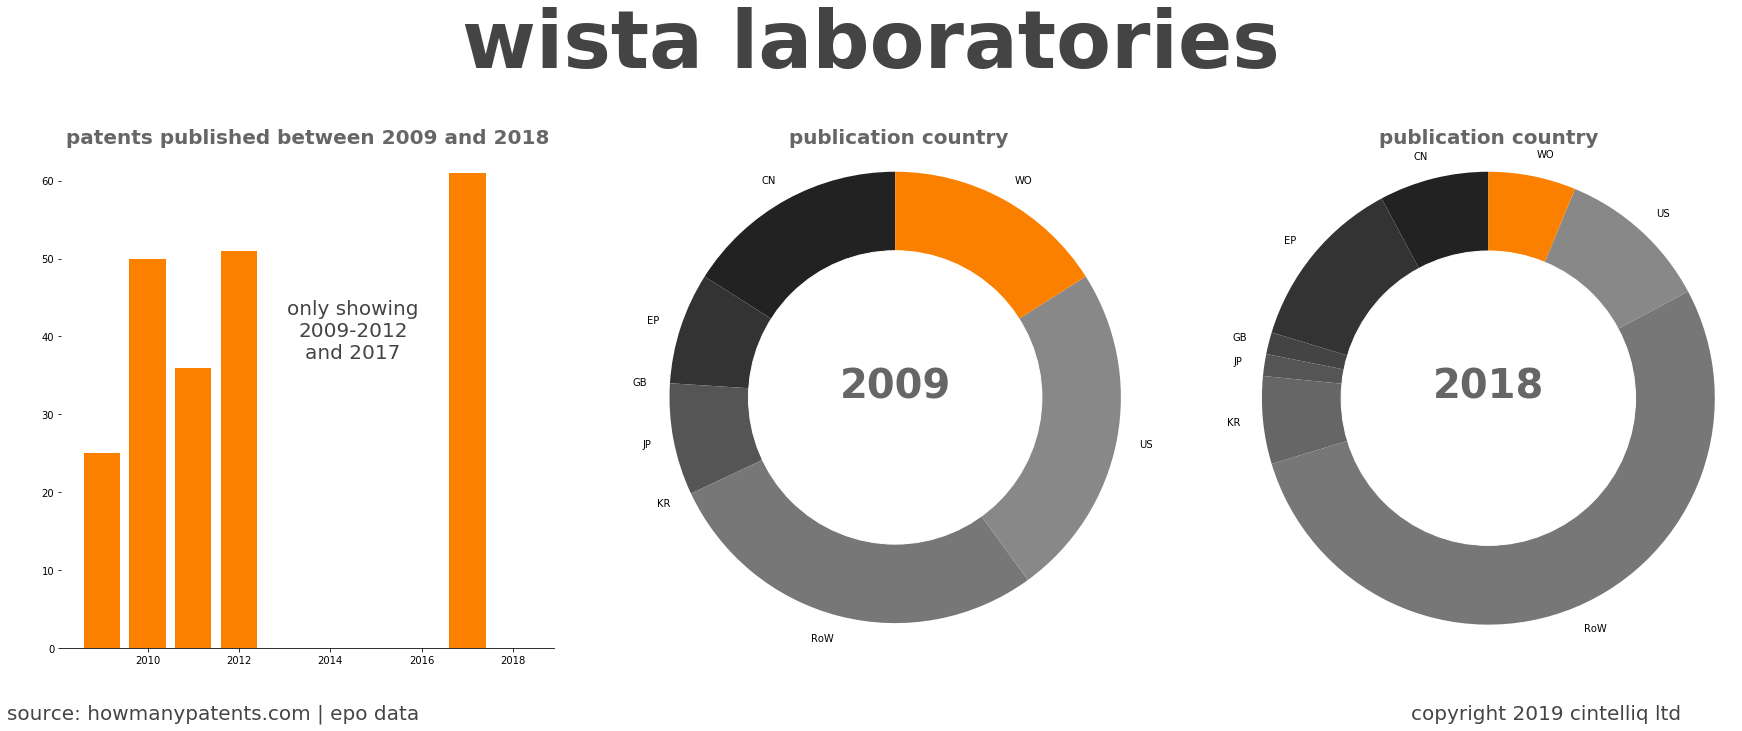 summary of patents for Wista Laboratories